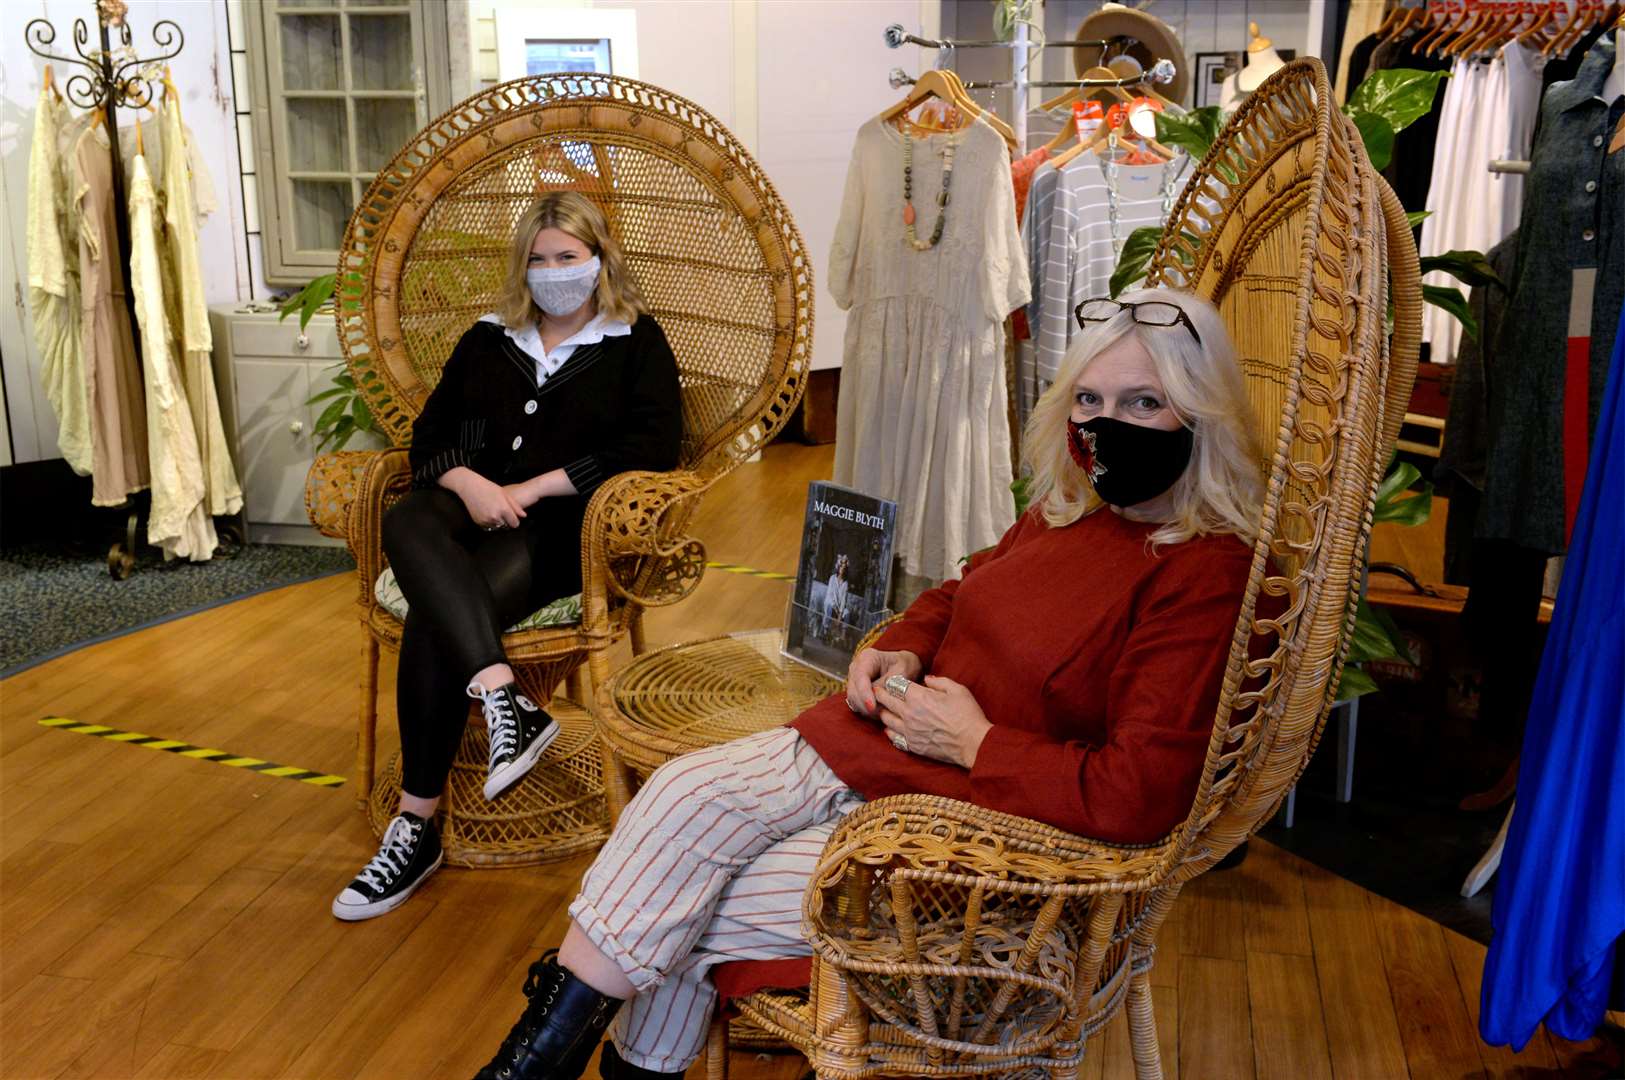 Maggie Blyth's Boutique has put safety measures in place for customers and staff. Picture: James Mackenzie